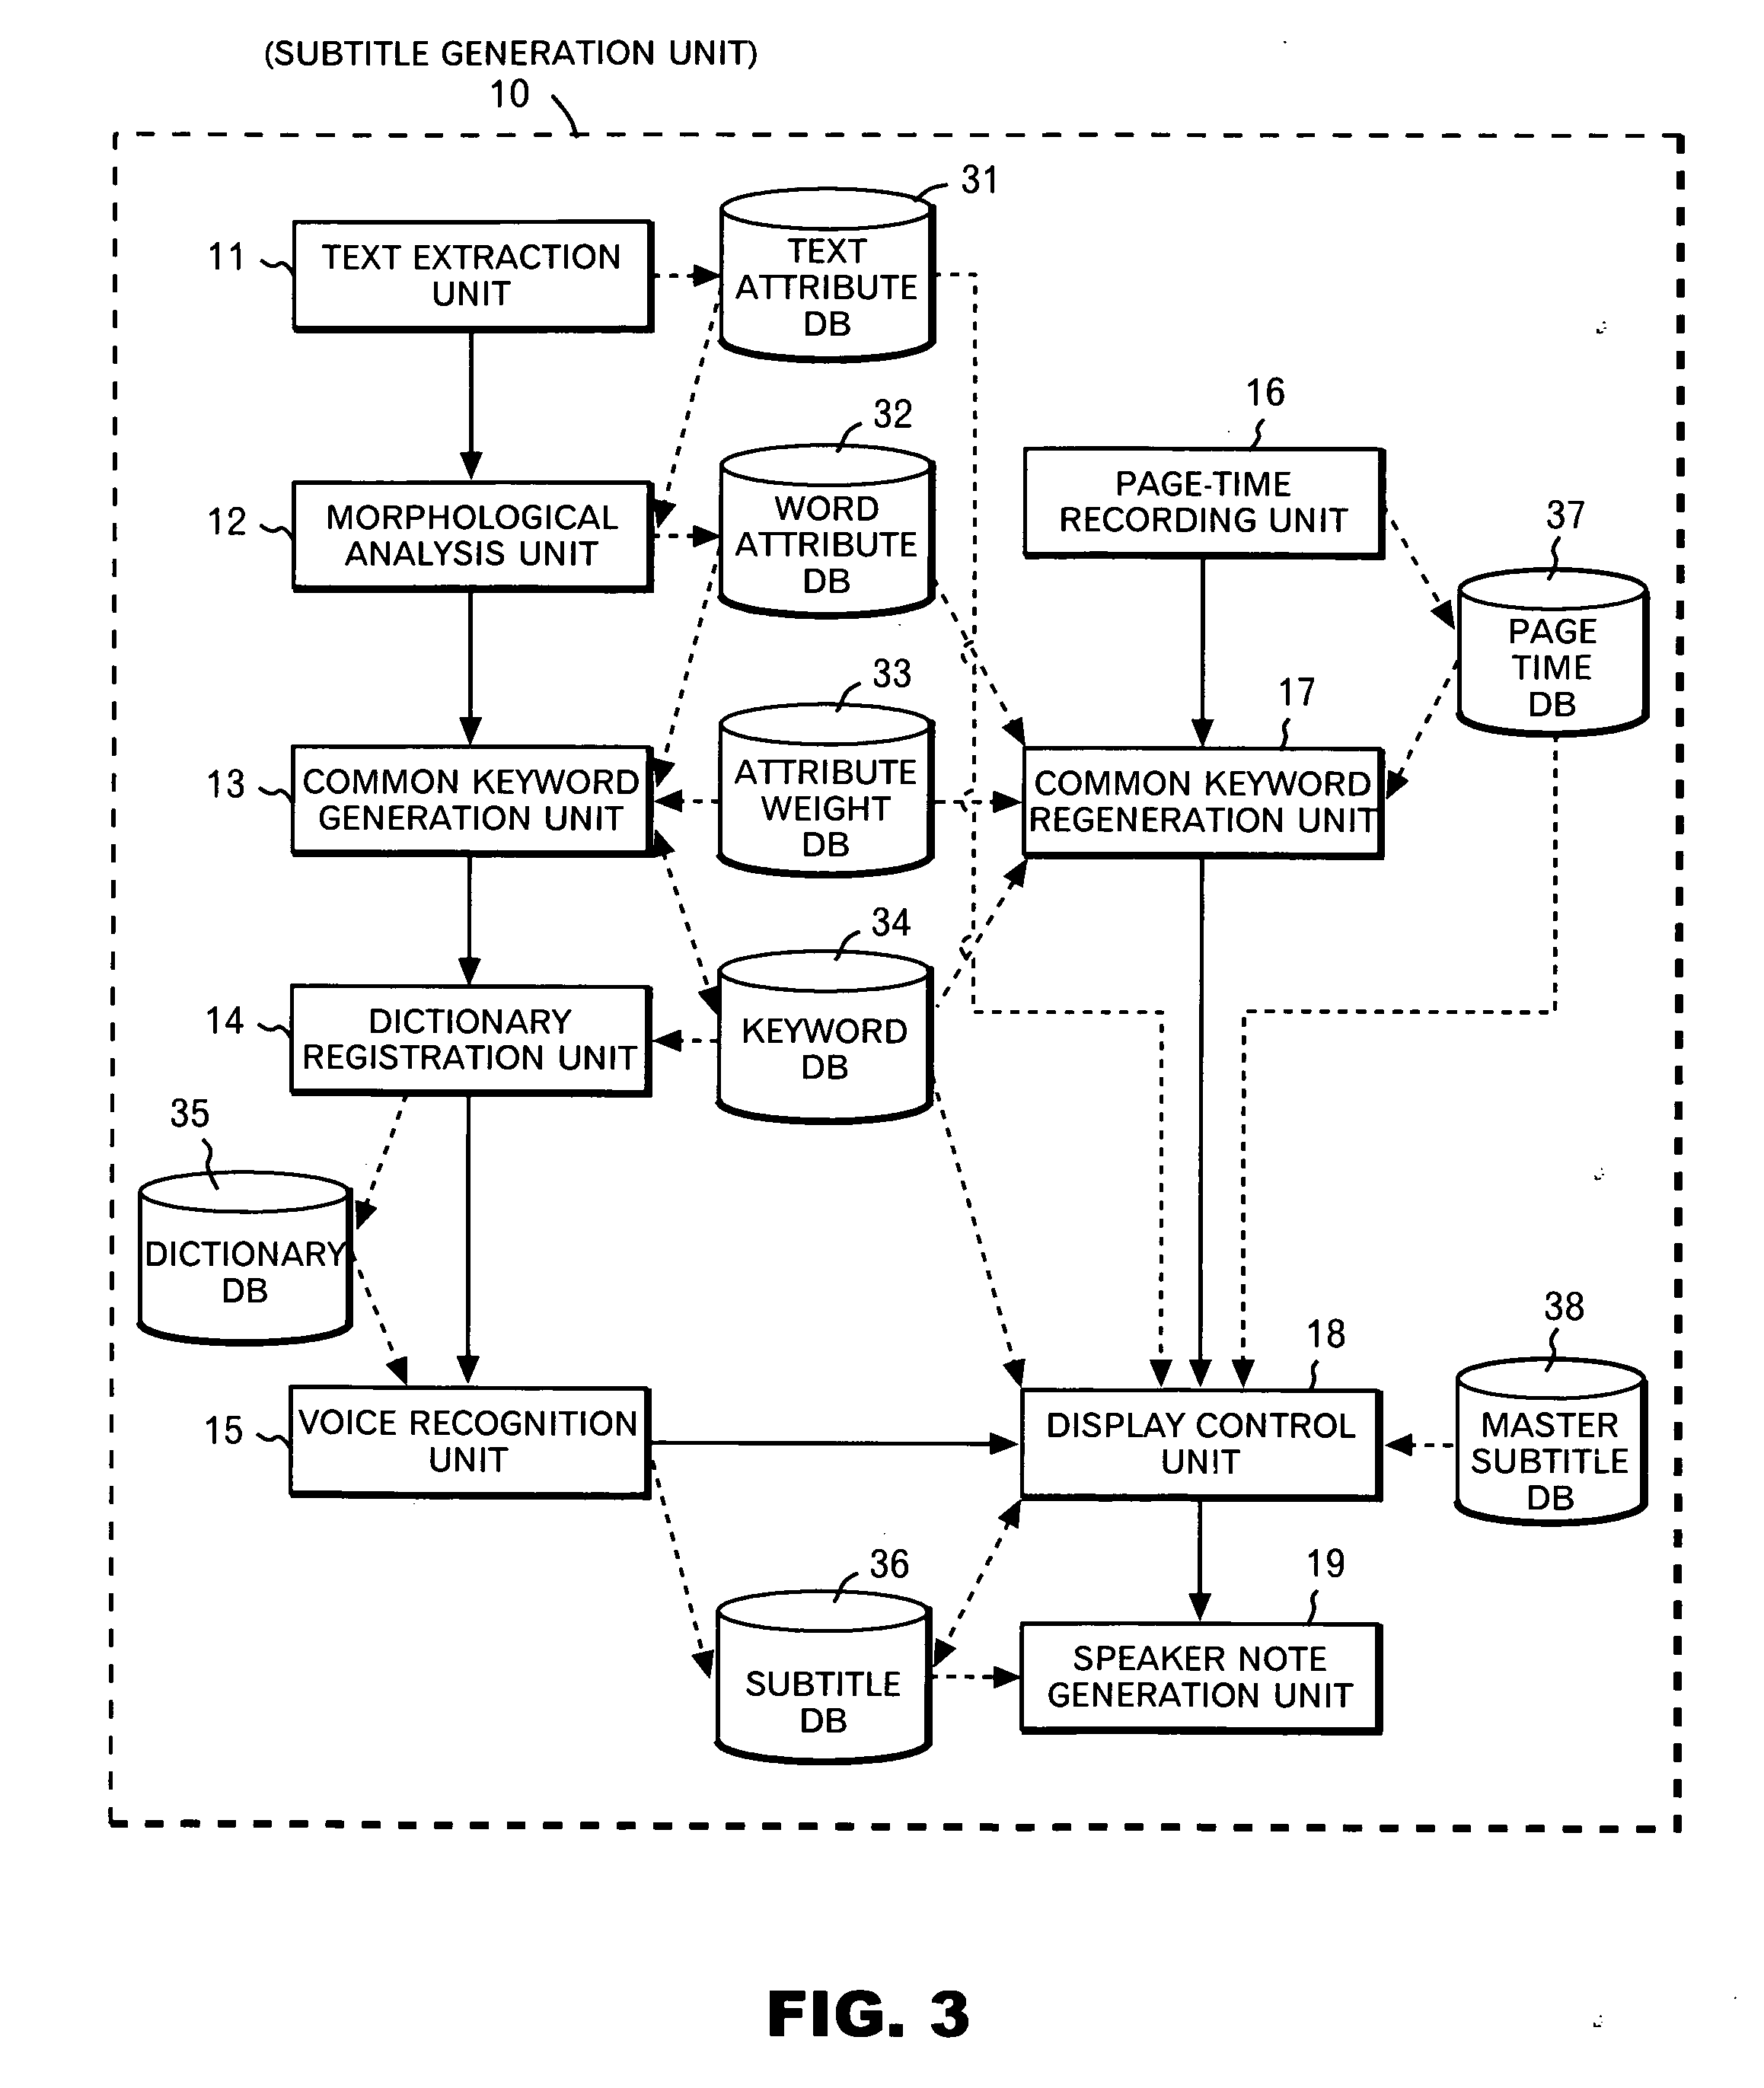 Subtitle generation and retrieval combining document processing with voice processing